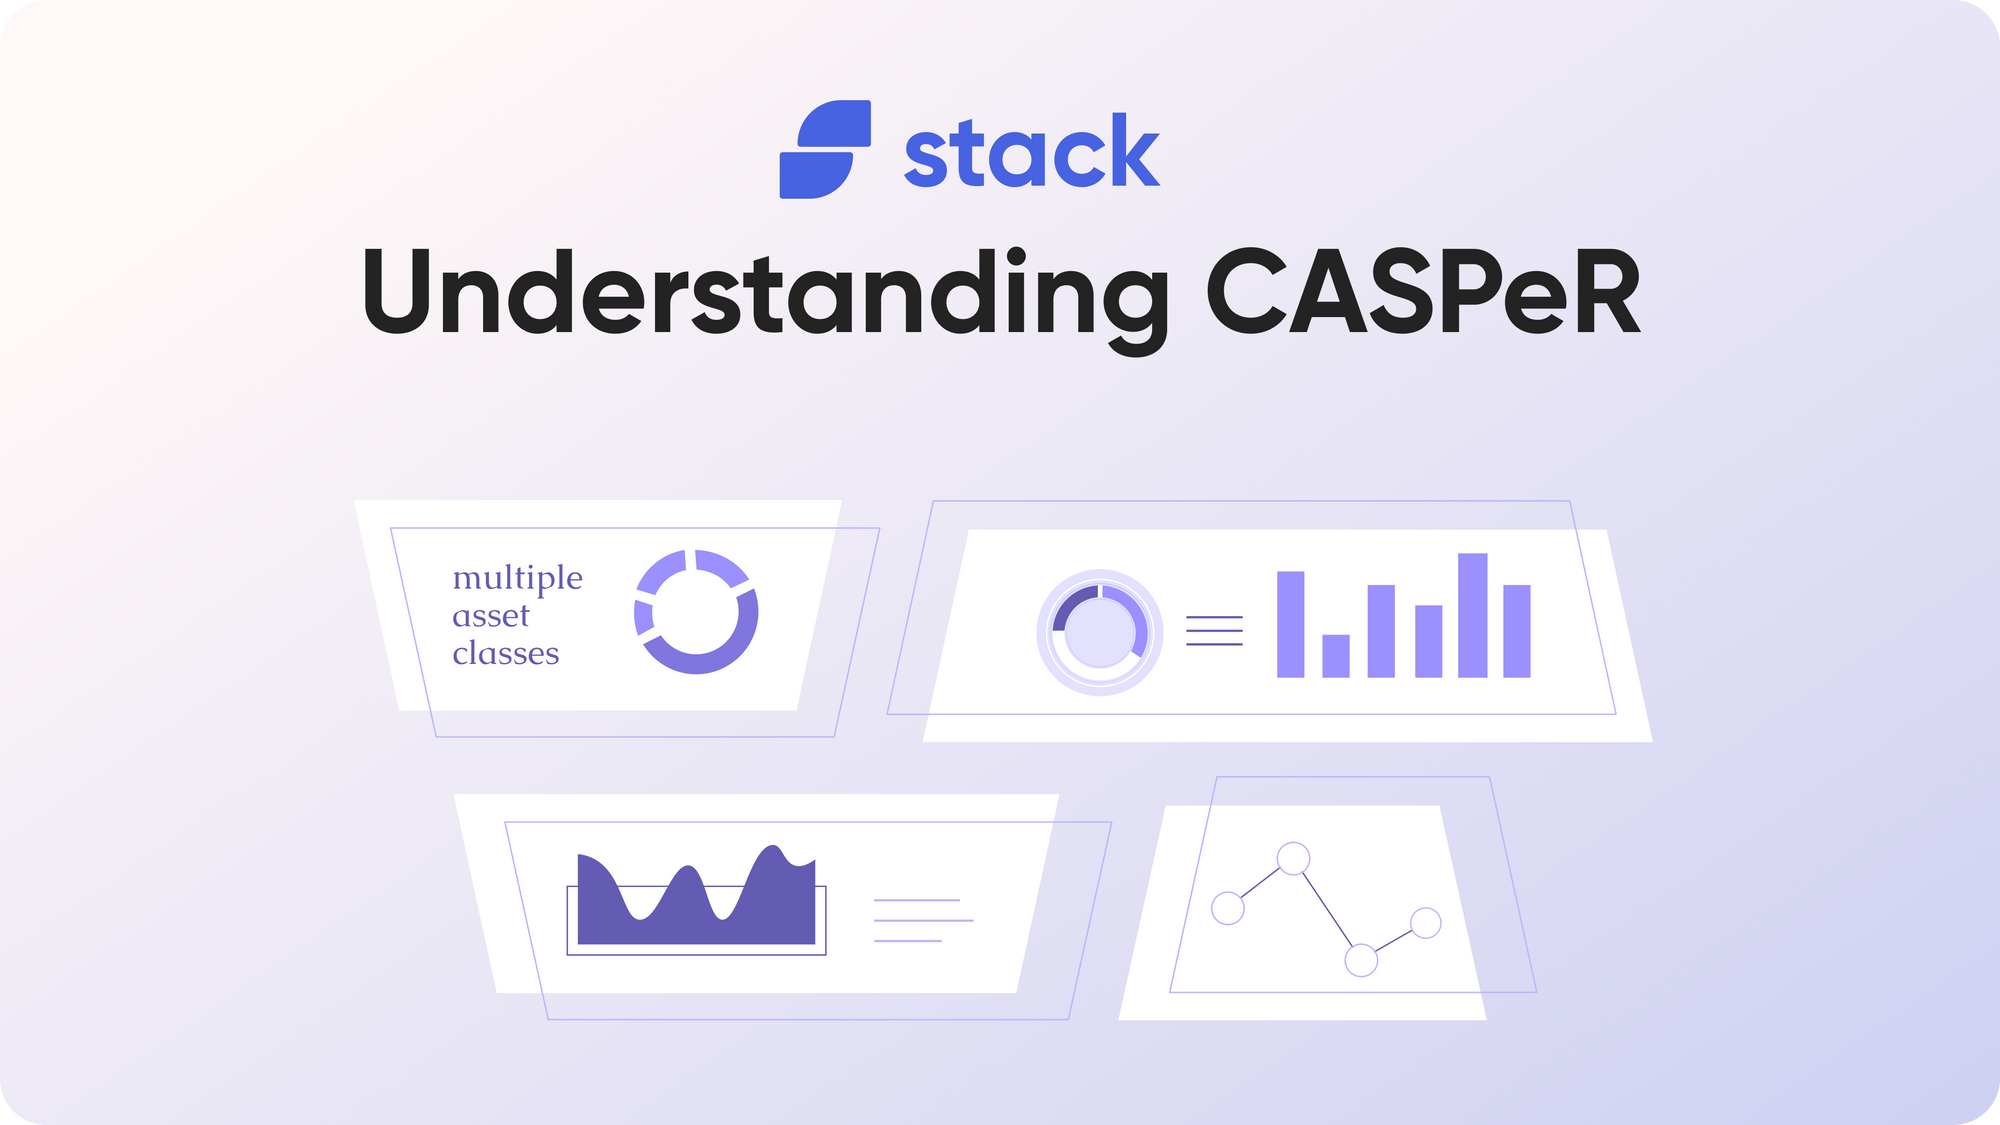 CASPeR: The Smart Stack Approach to Investing